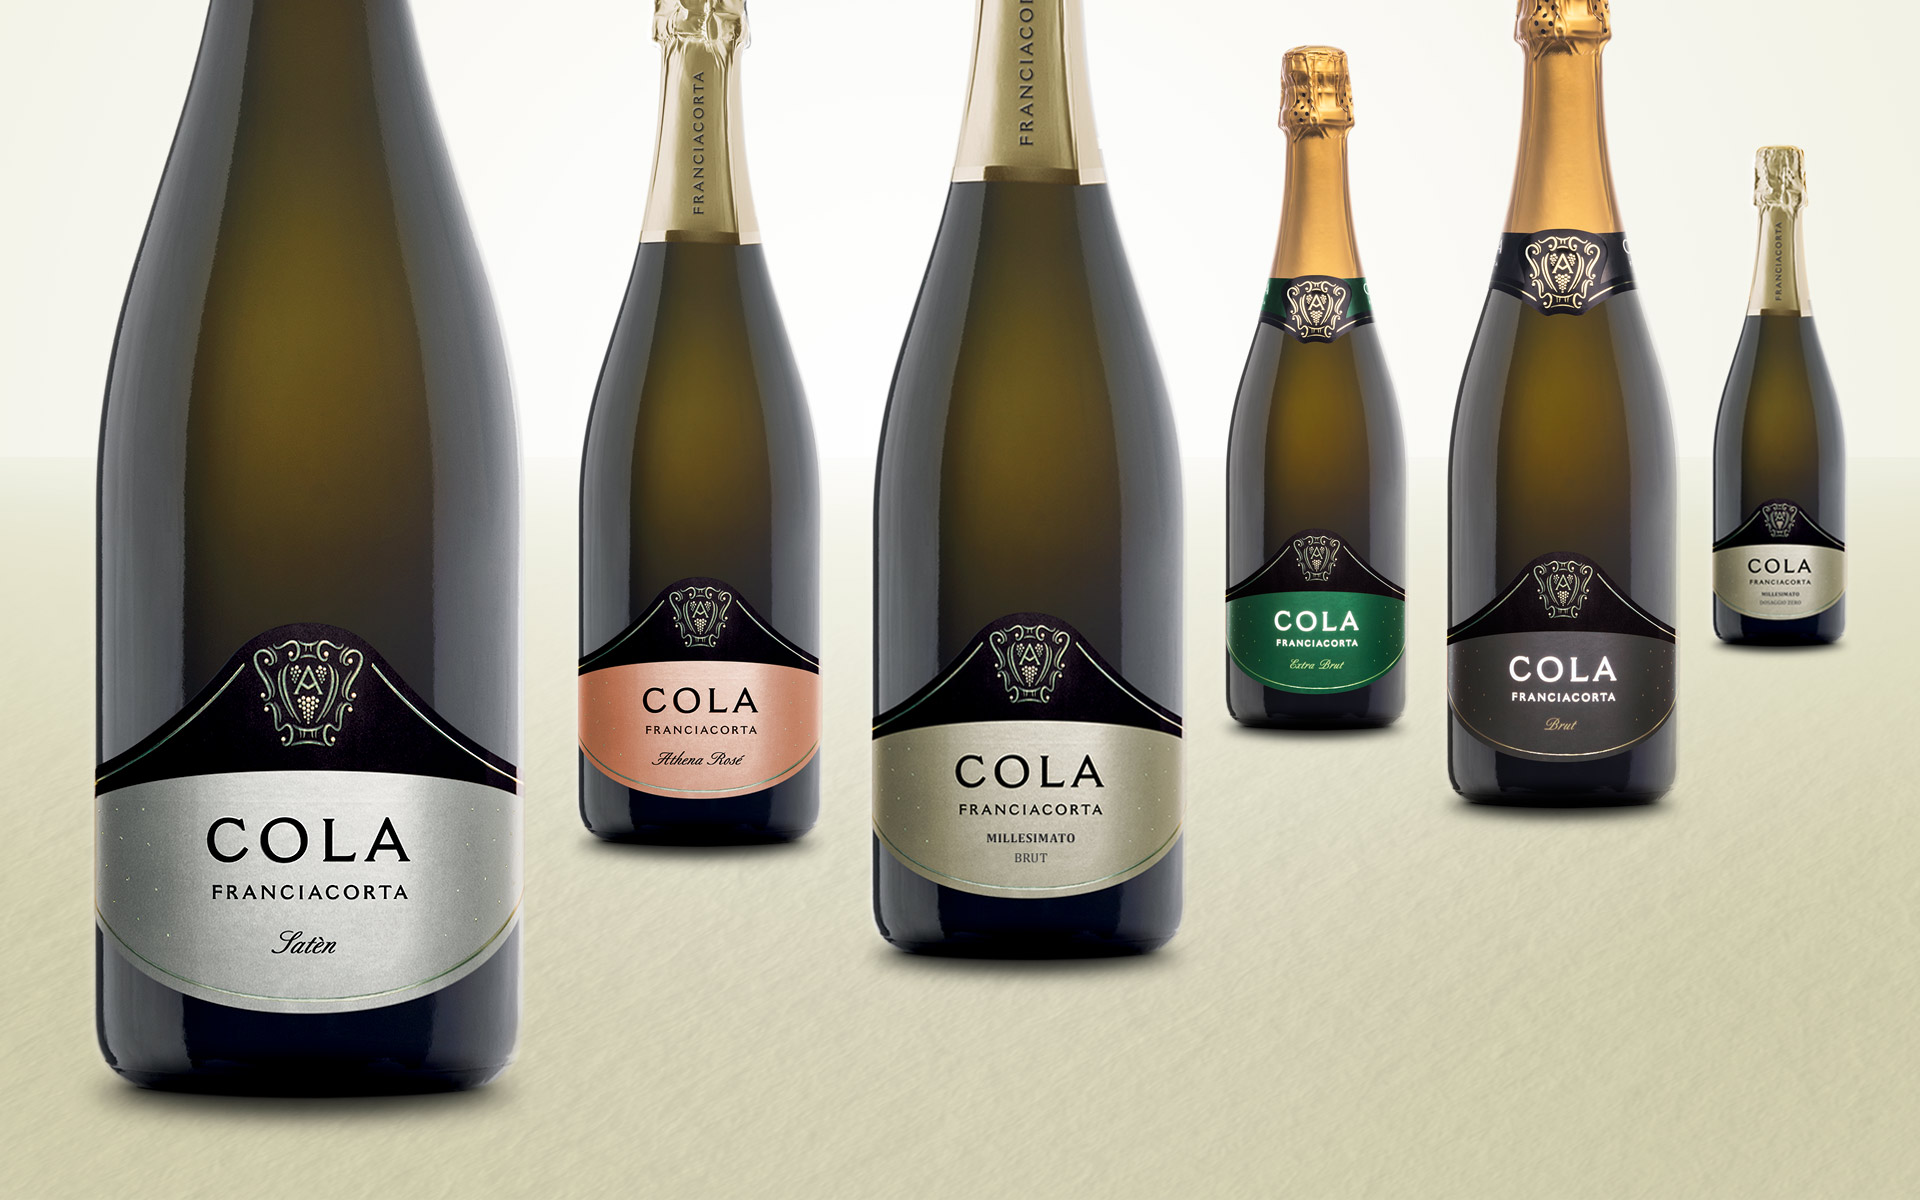 Family passion, essence of Franciacorta zone